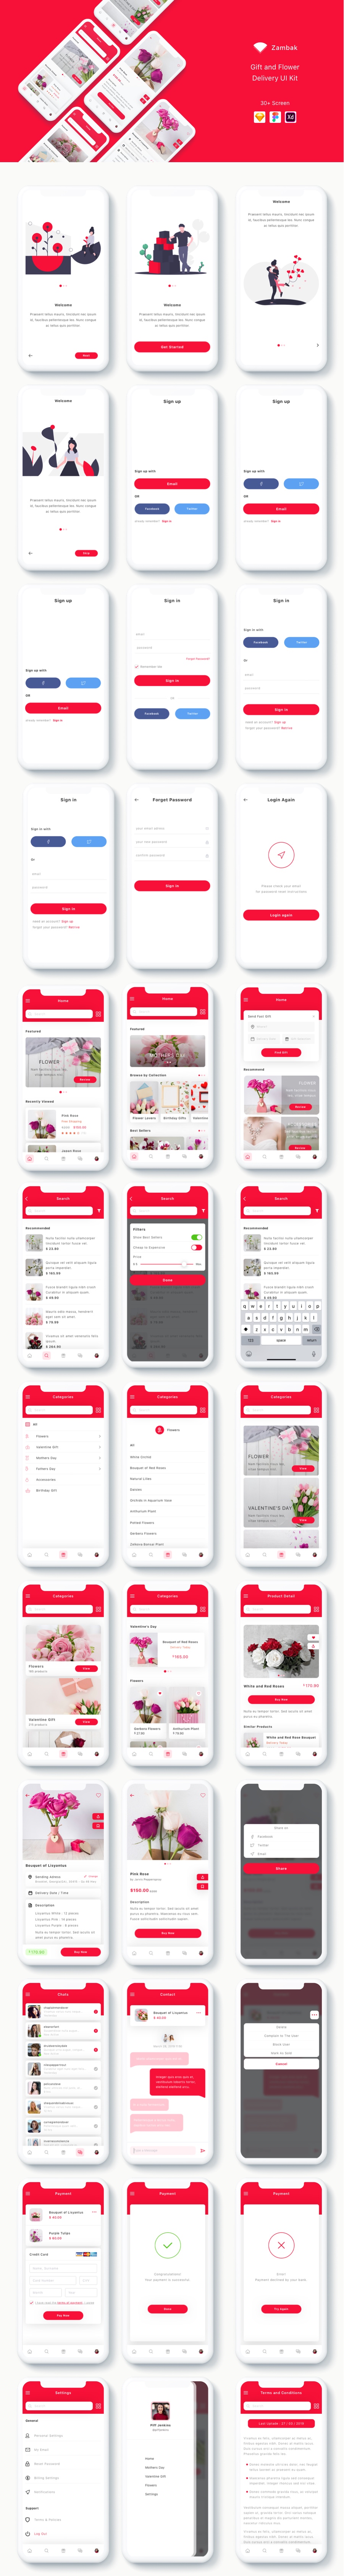 Zambak - Gift and Flower Delivery App UI Kit - 2